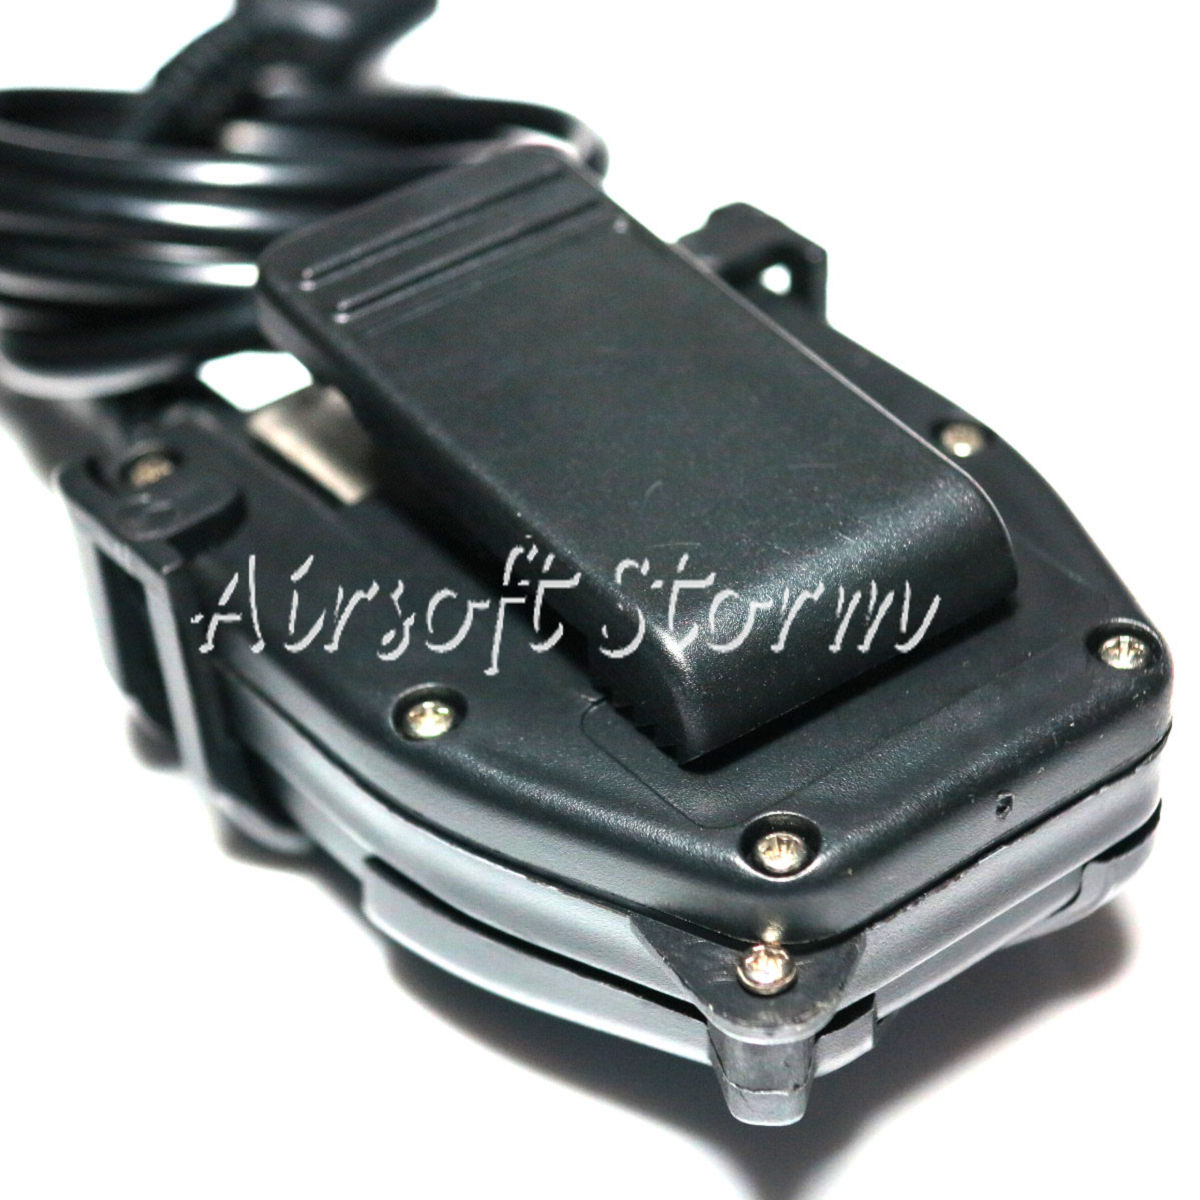 Airsoft Gear SWAT Element Peltor Headset PTT for ICOM 2 Pin Radio - Click Image to Close